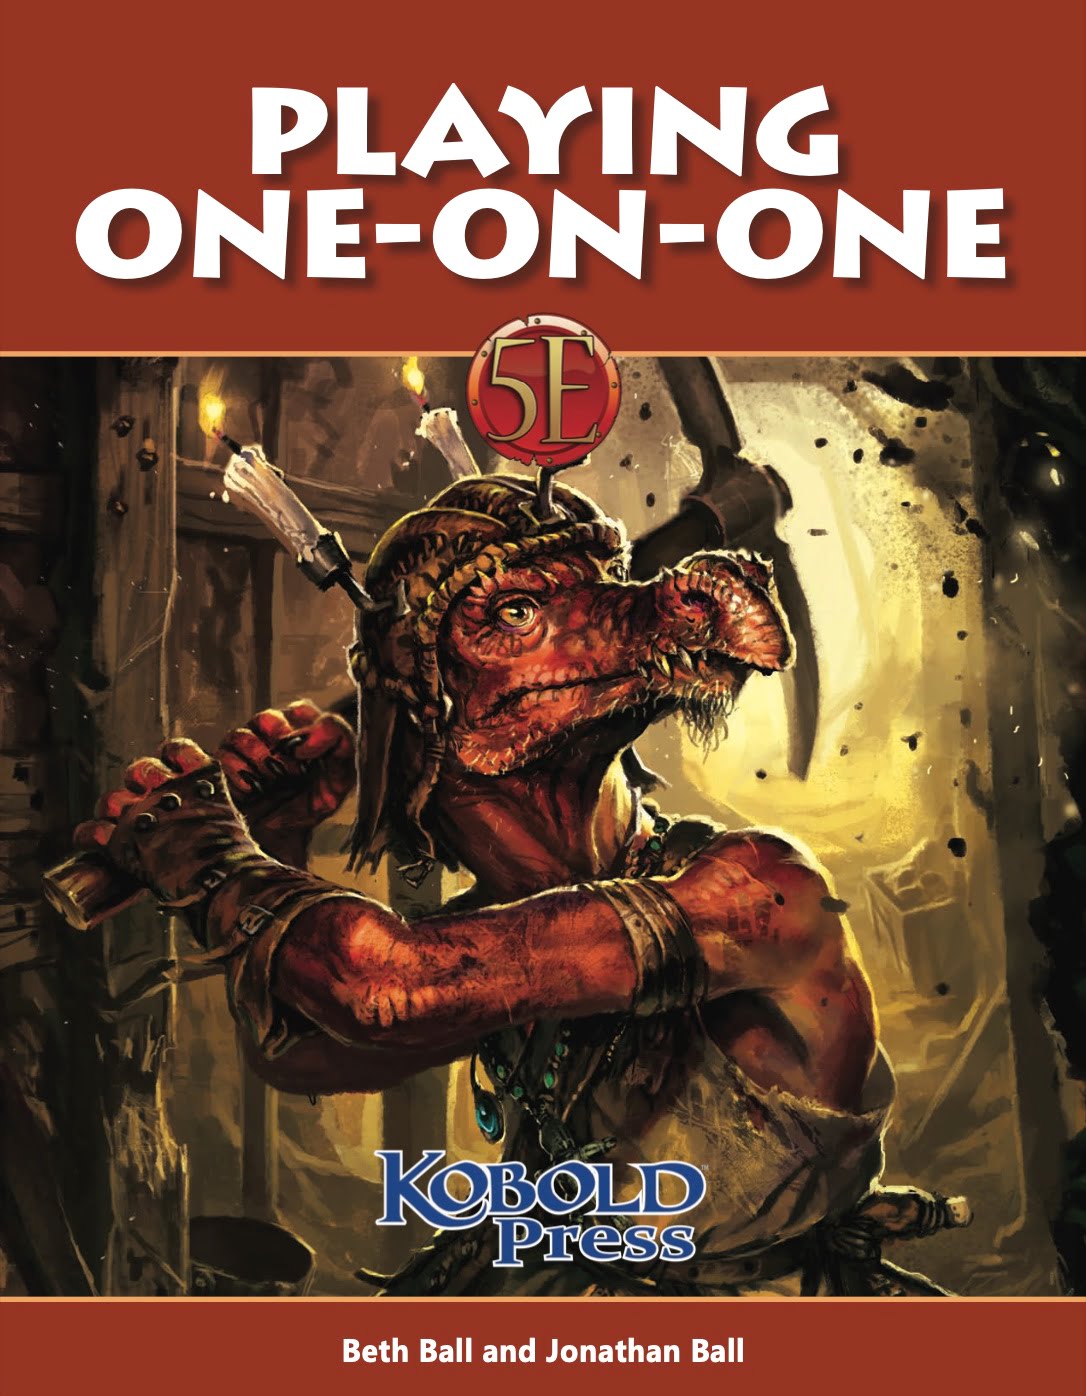 kobold-press-5  The Opinionated Gamers